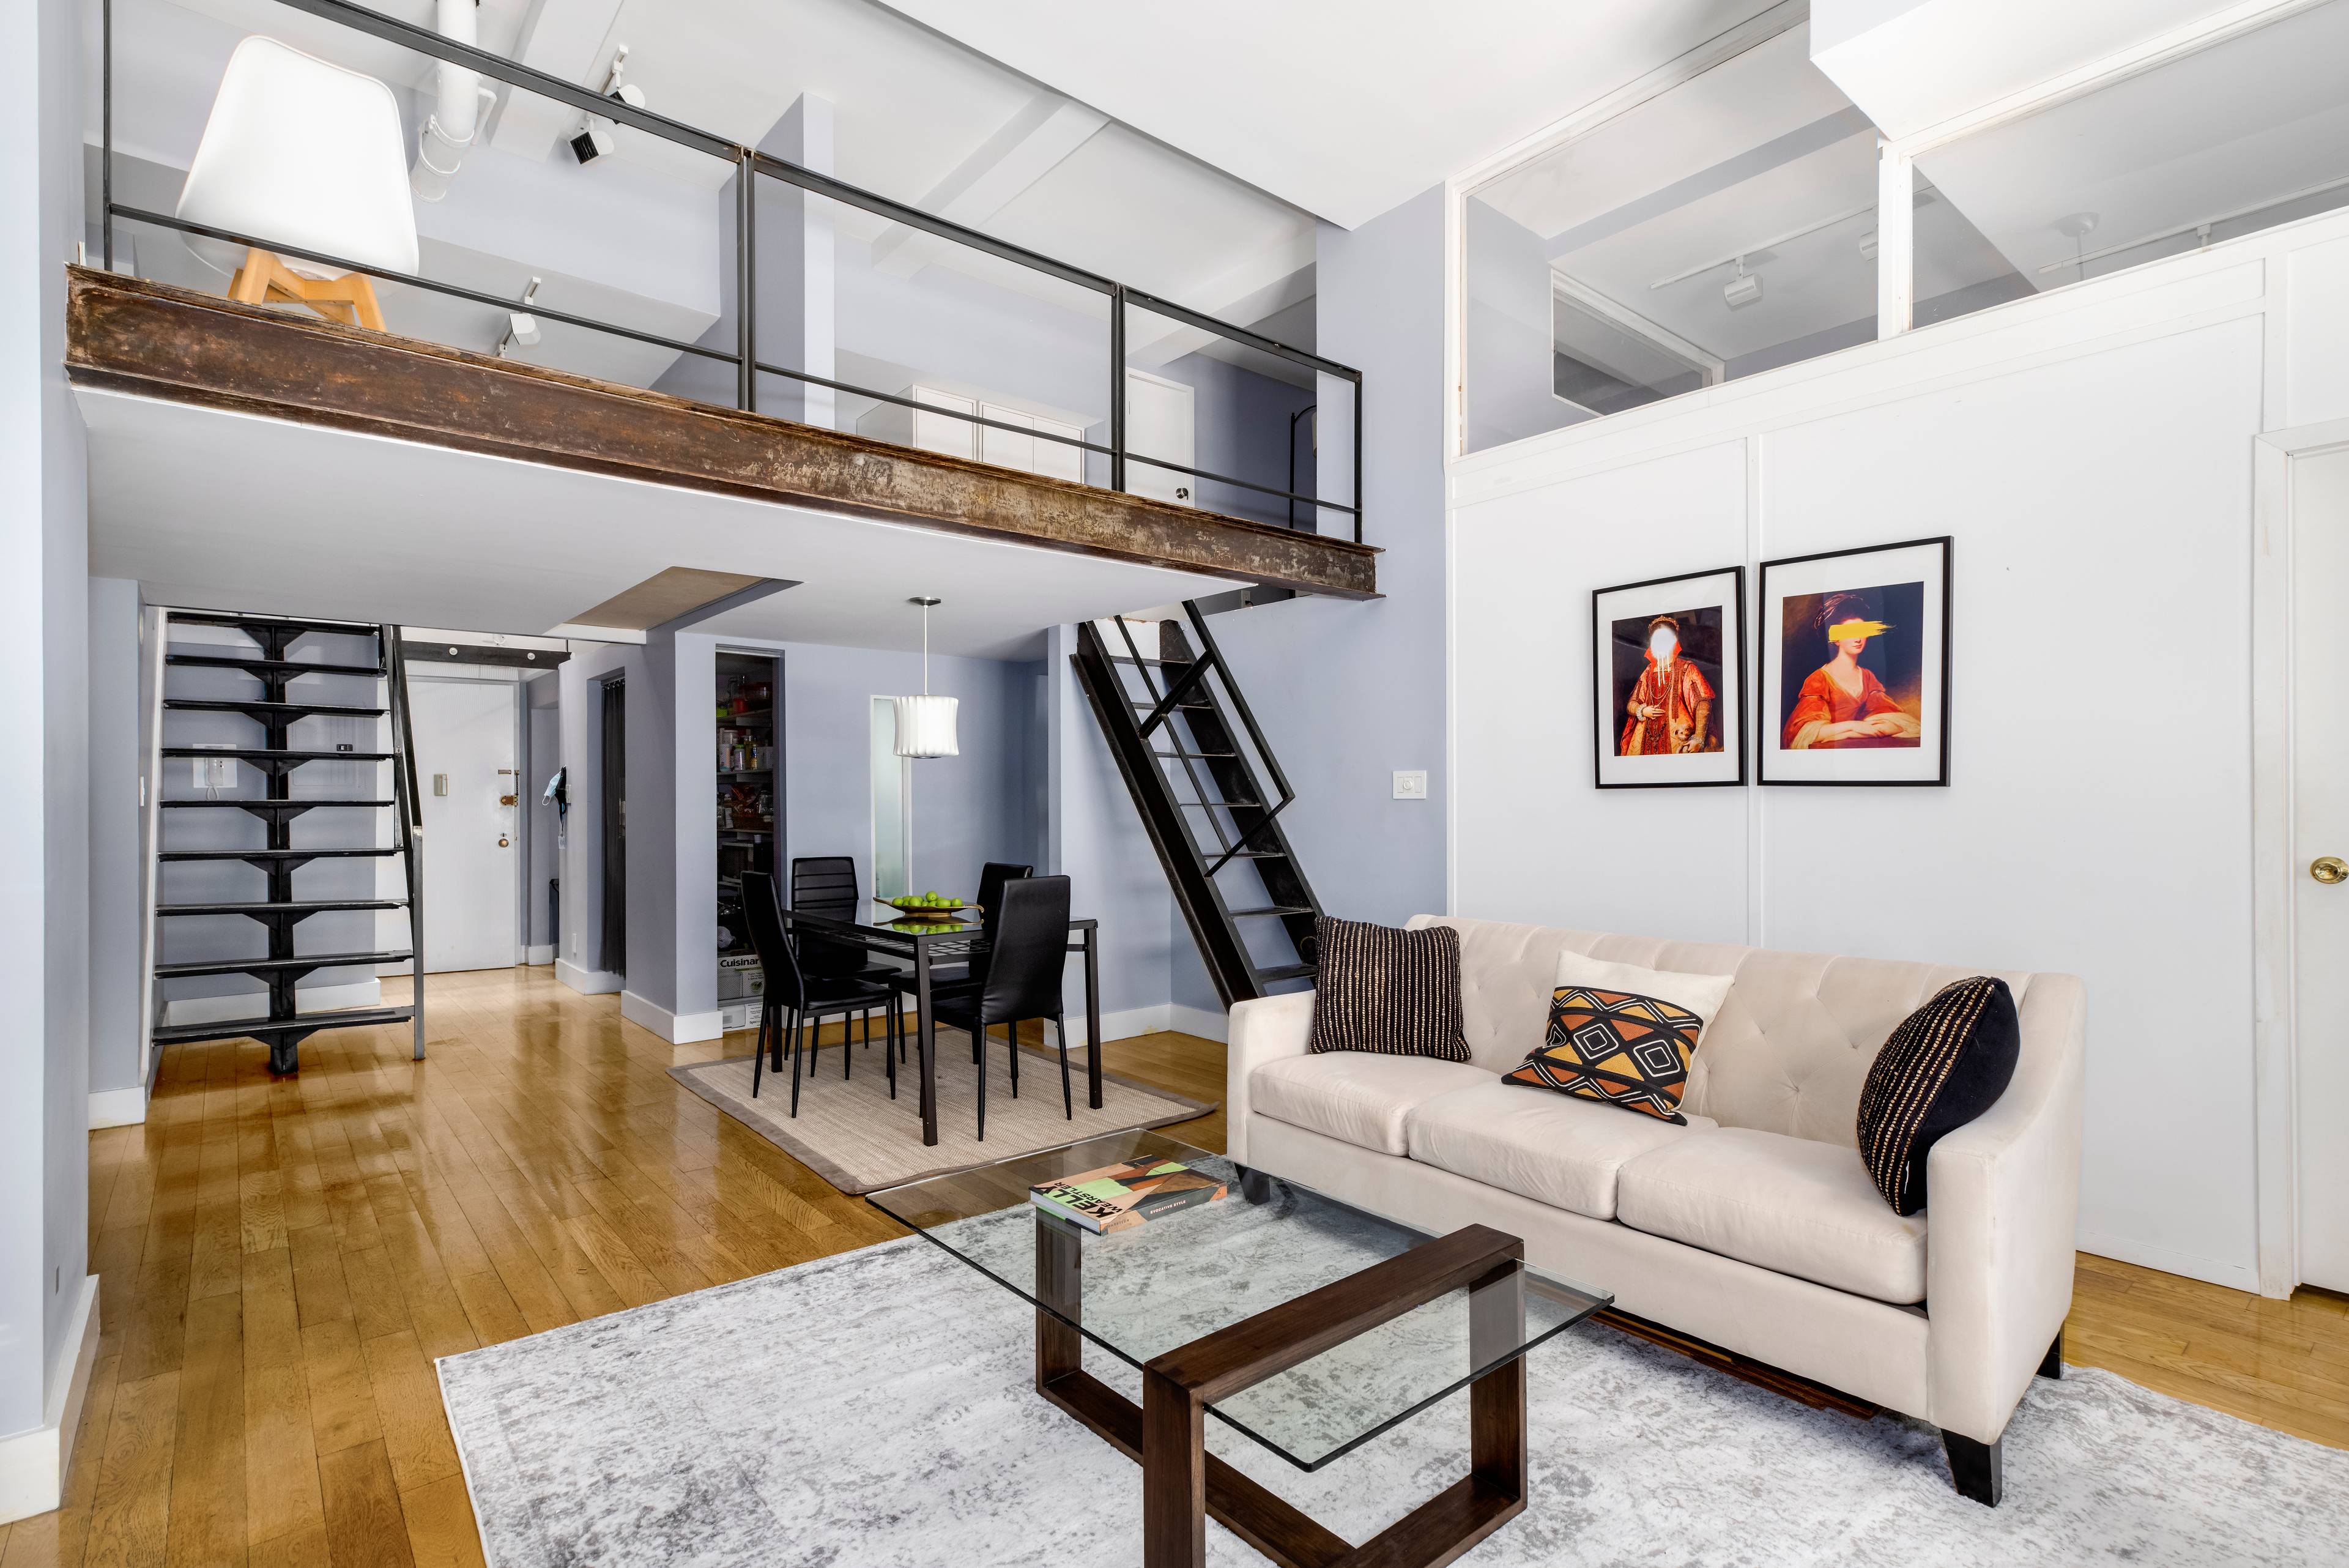 Enjoy loft like living in one of Midtown's most desirable neighborhoods in this expansive duplex cooperative offering move in ready finishes on a lovely Beekman block.